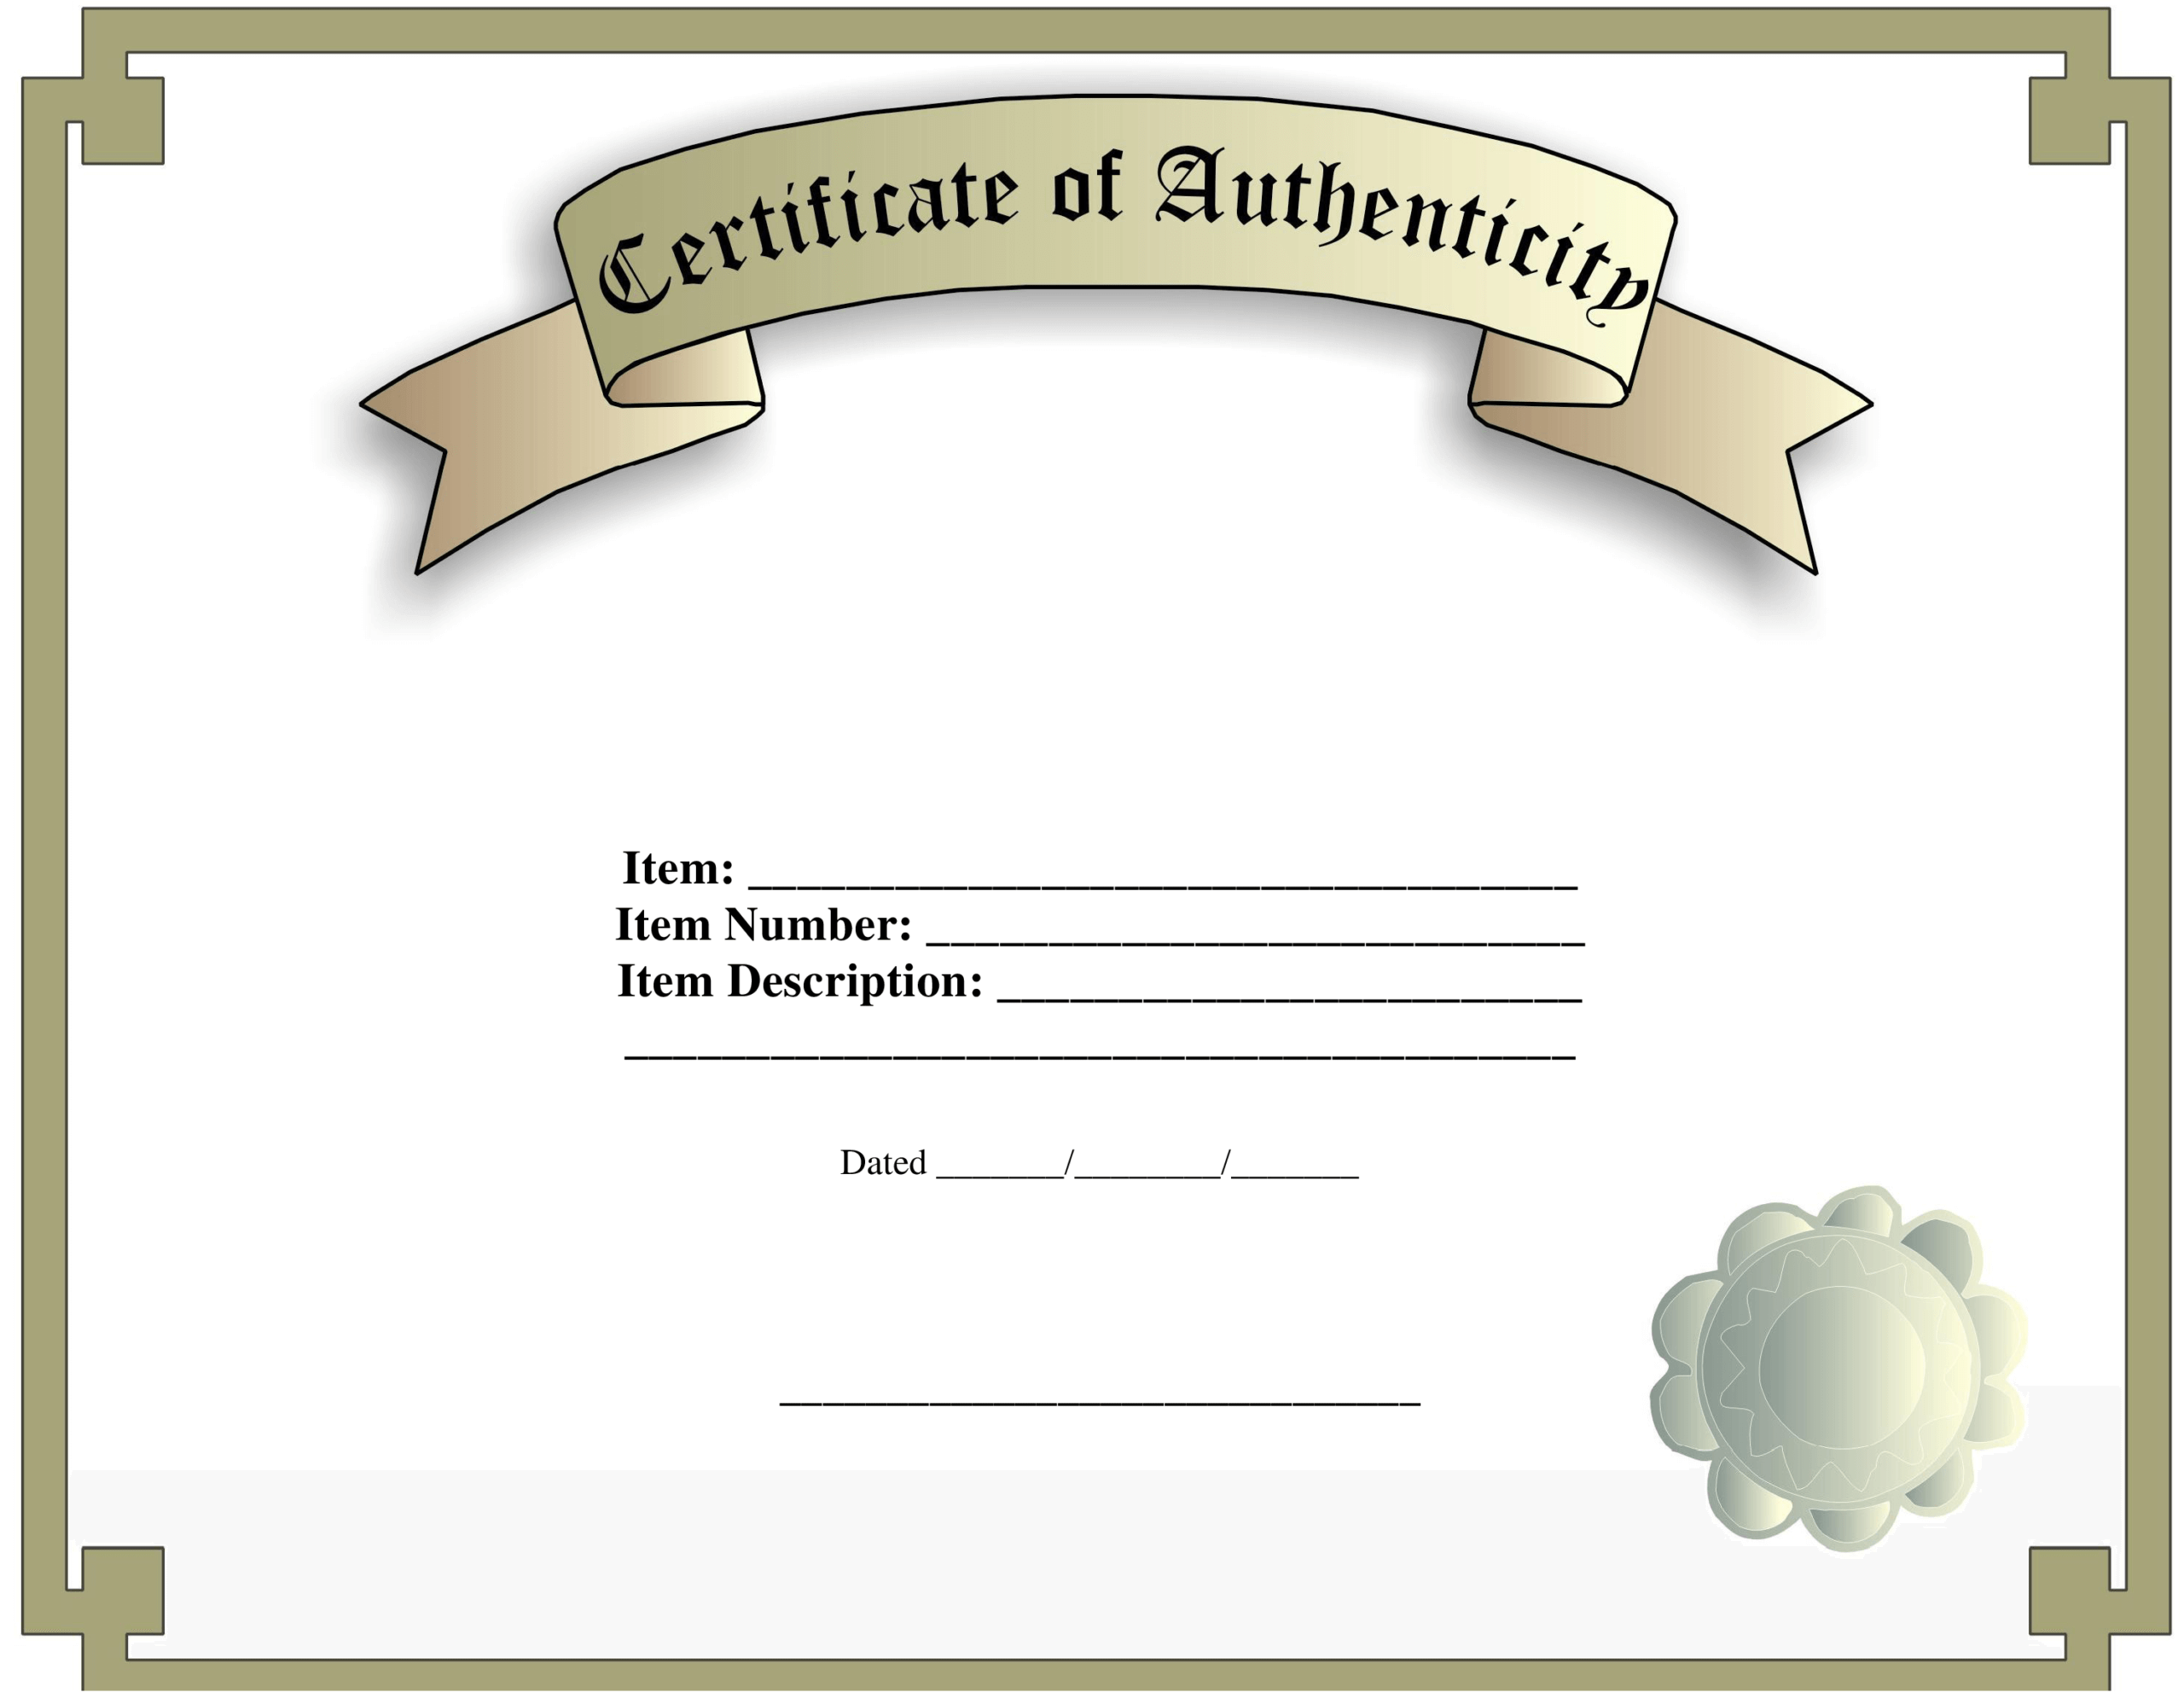 Certificate Of Authenticity Template | Templates At In Certificate Of Authenticity Template